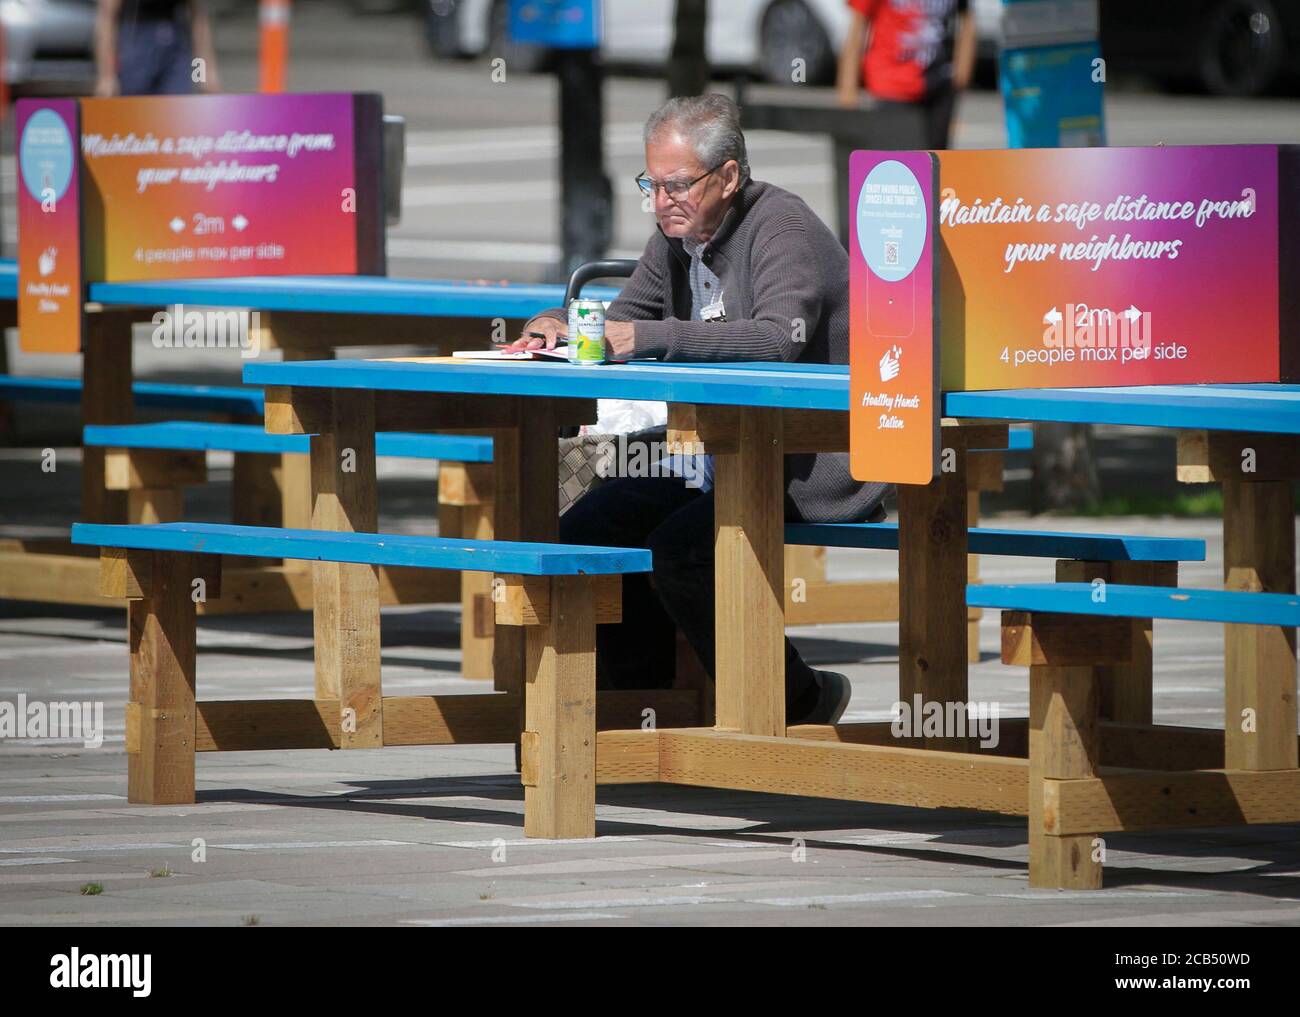 Vancouver, Canada. 10th Aug, 2020. A man sits at the alcohol drinking area at the Vancouver Art Gallery plaza in Vancouver, British Columbia, Canada, Aug. 10, 2020. Vancouver launched a temporary pilot program Monday allowing public consumption of alcohol in select locations. The program aims to encourage people to keep social distance in outdoor space while enjoying drinking, and also to support local food businesses during the COVID-19 pandemic. Credit: Liang Sen/Xinhua/Alamy Live News Stock Photo